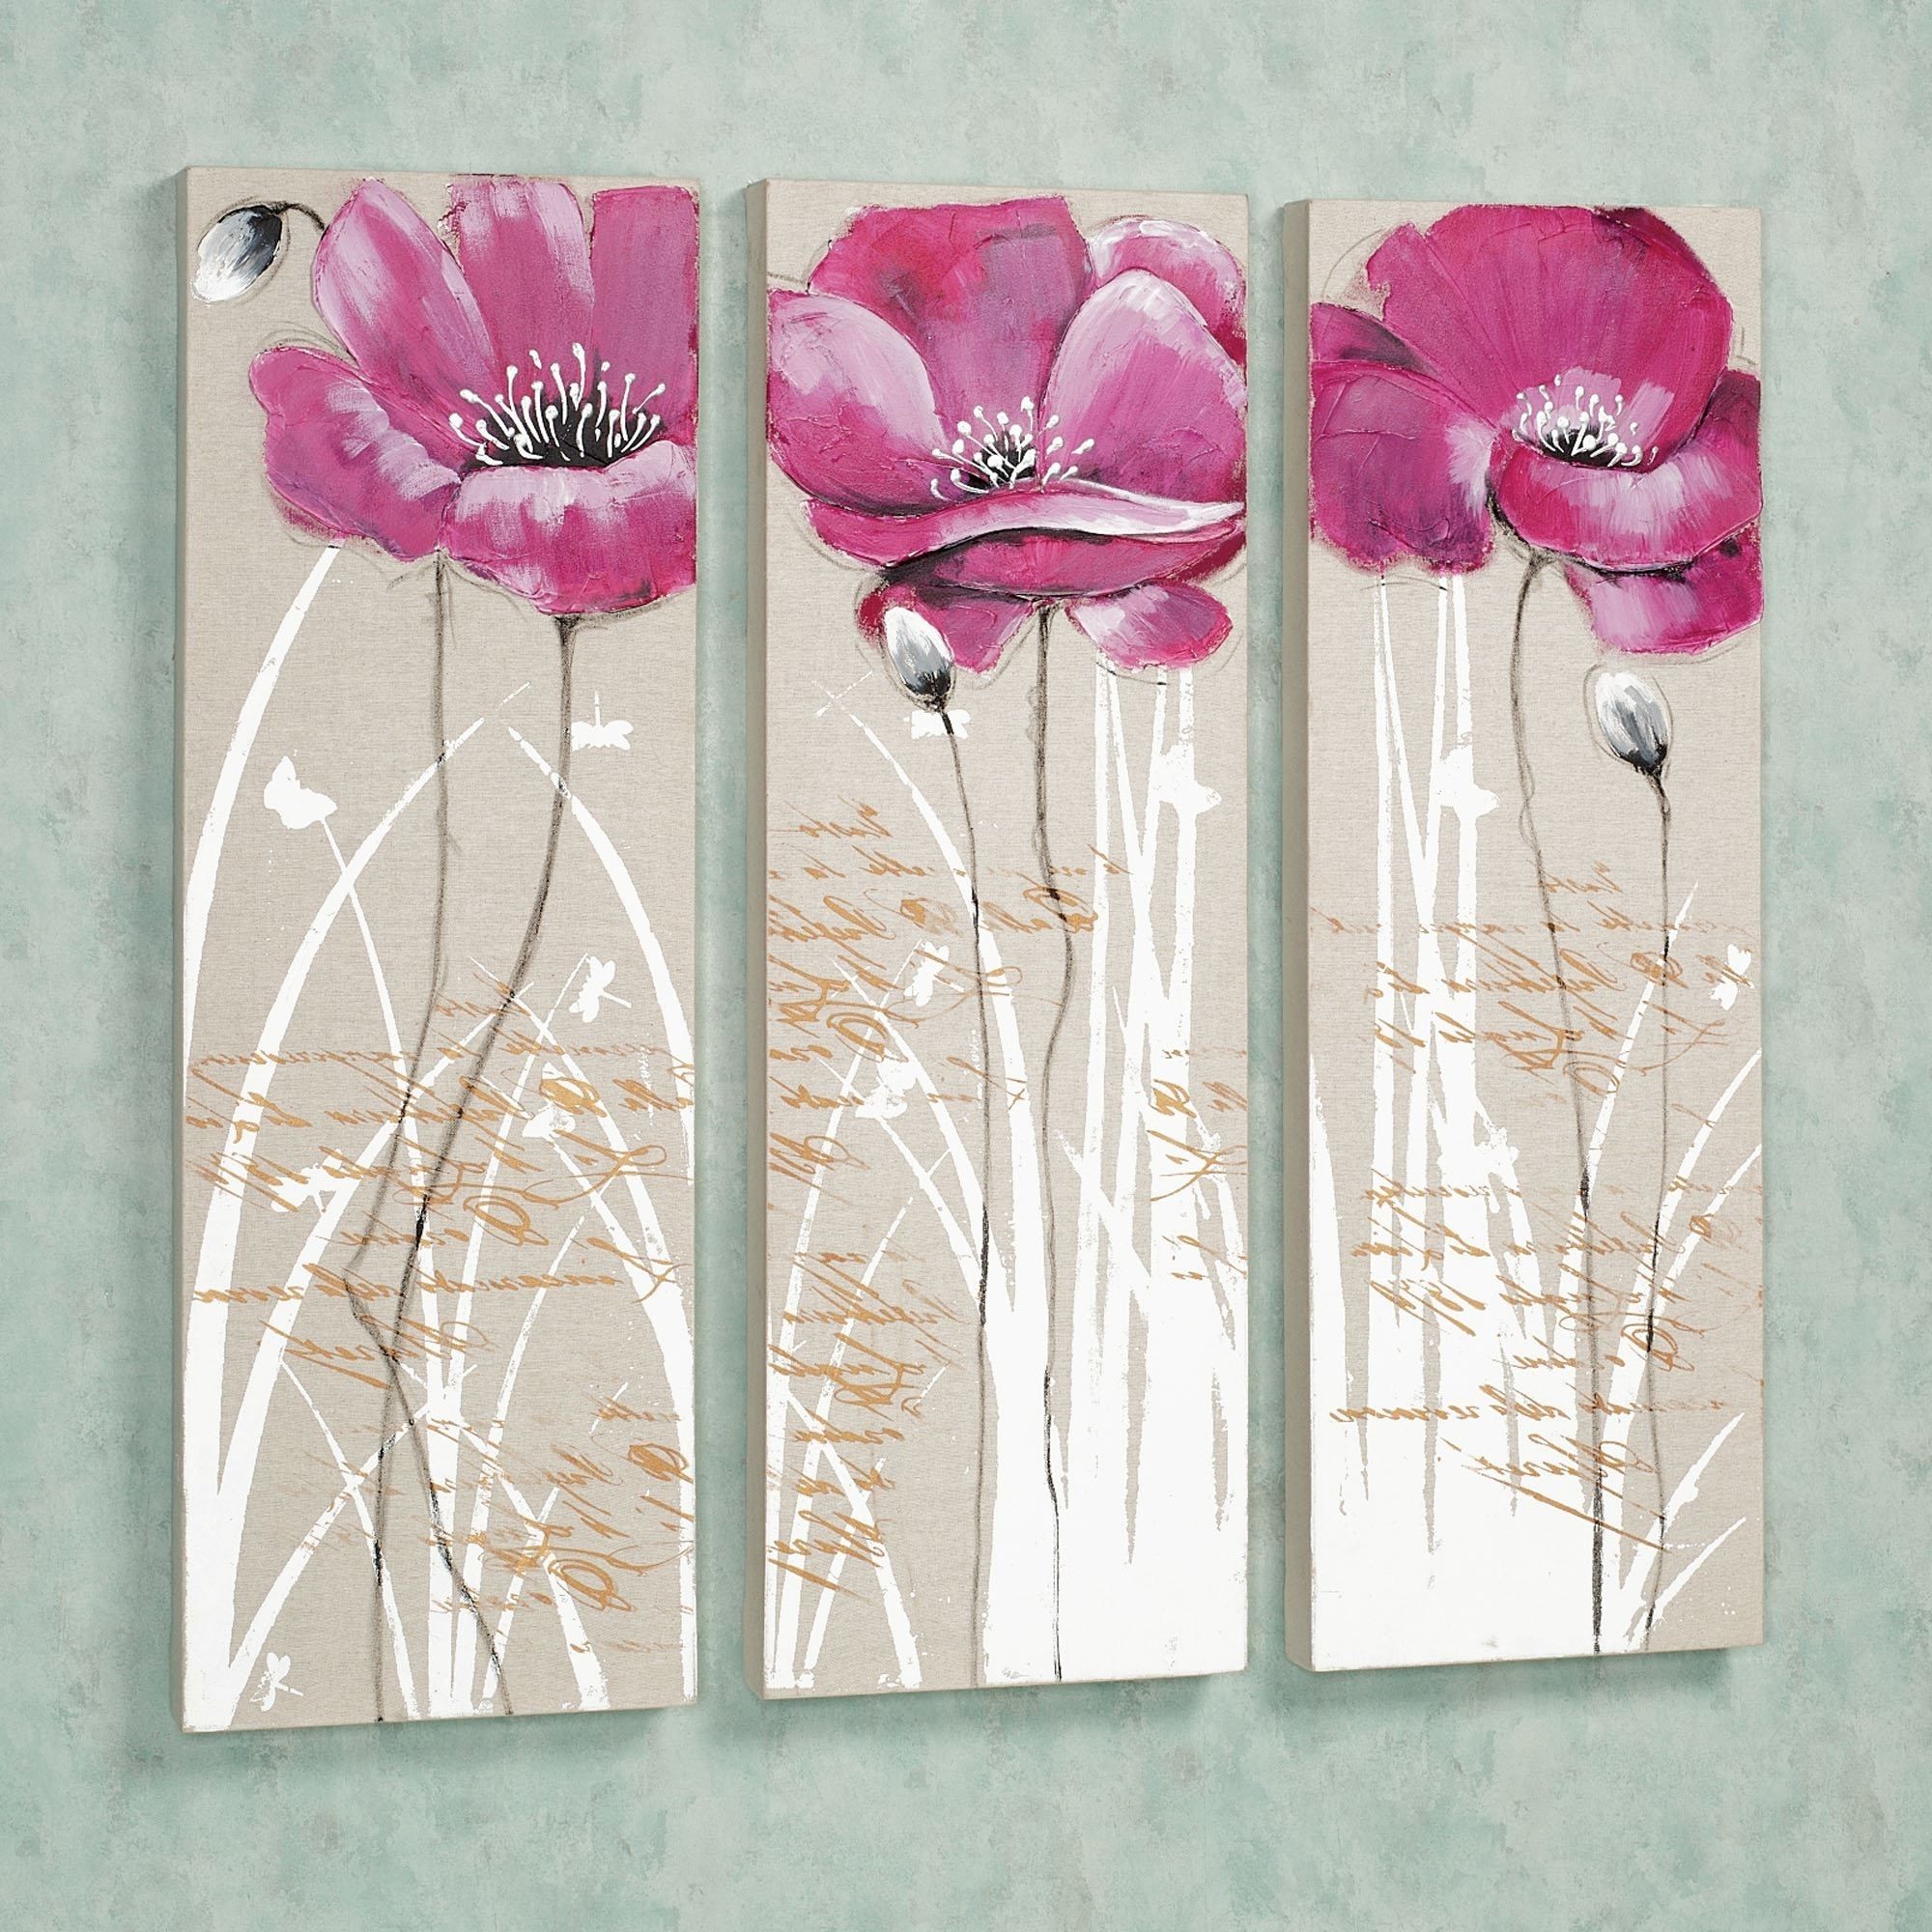 Most Recent Poppies Canvas Wall Art Intended For Floral And Botanical Canvas Wall Art (View 13 of 15)